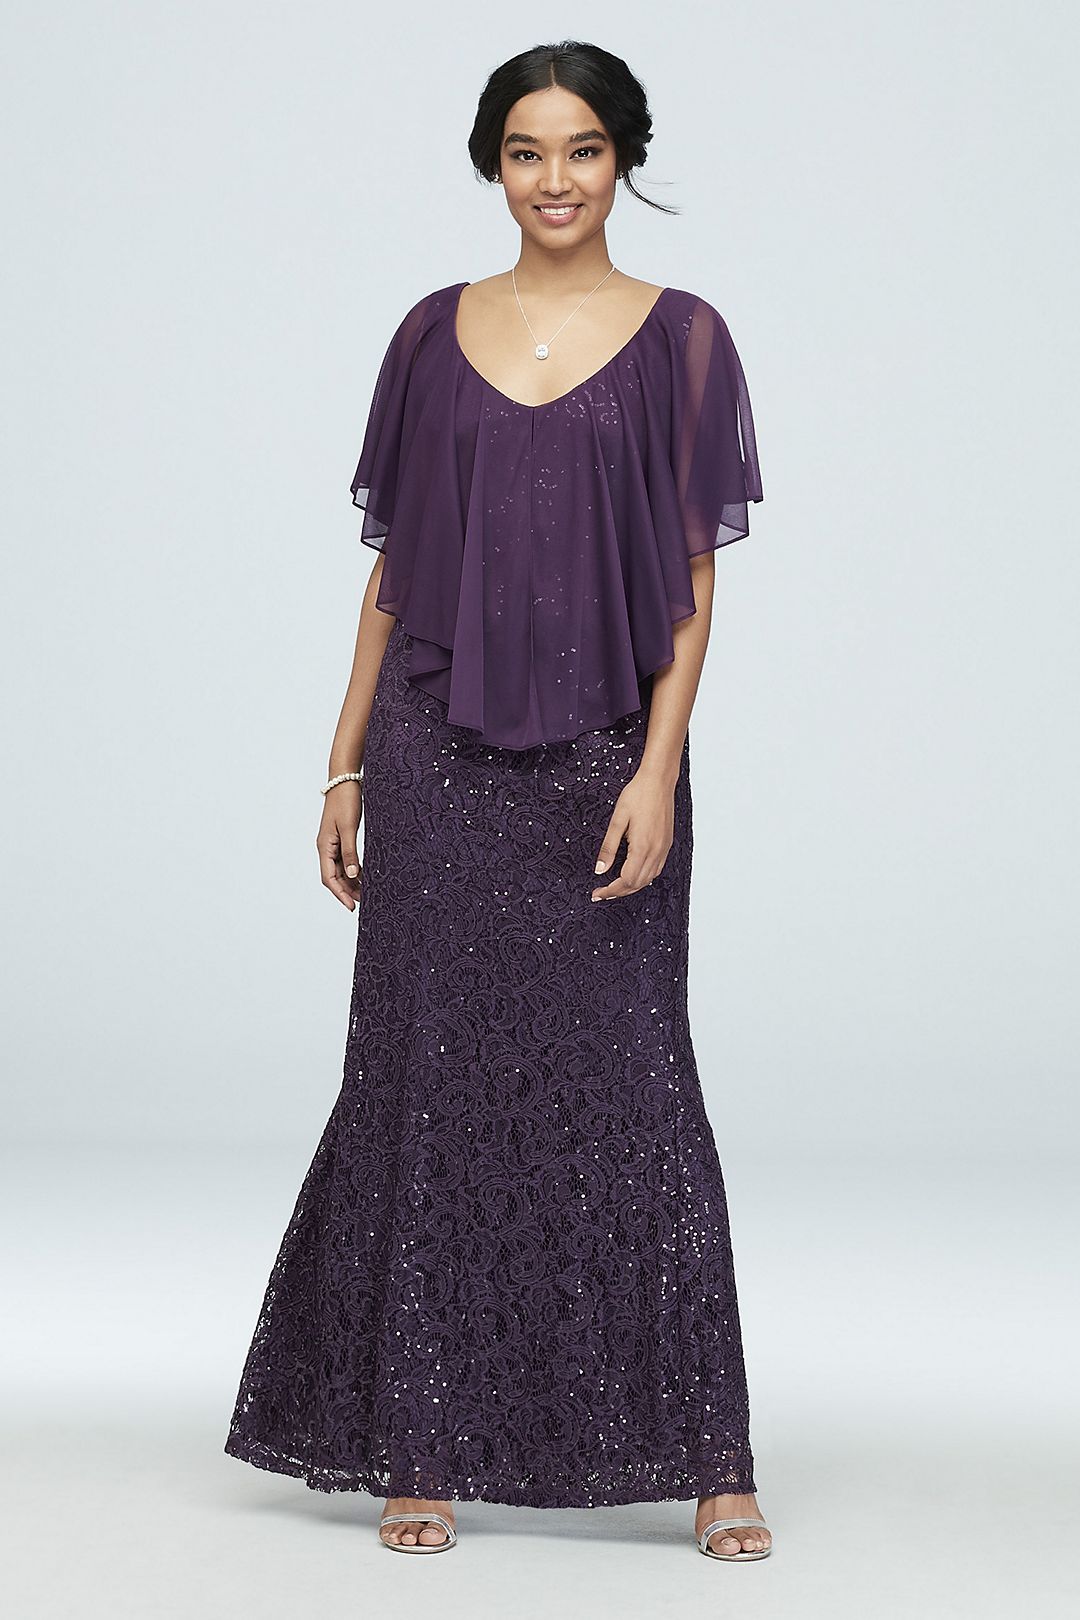 Sequin Lace Gown with Cold Shoulder Capelet Image 1